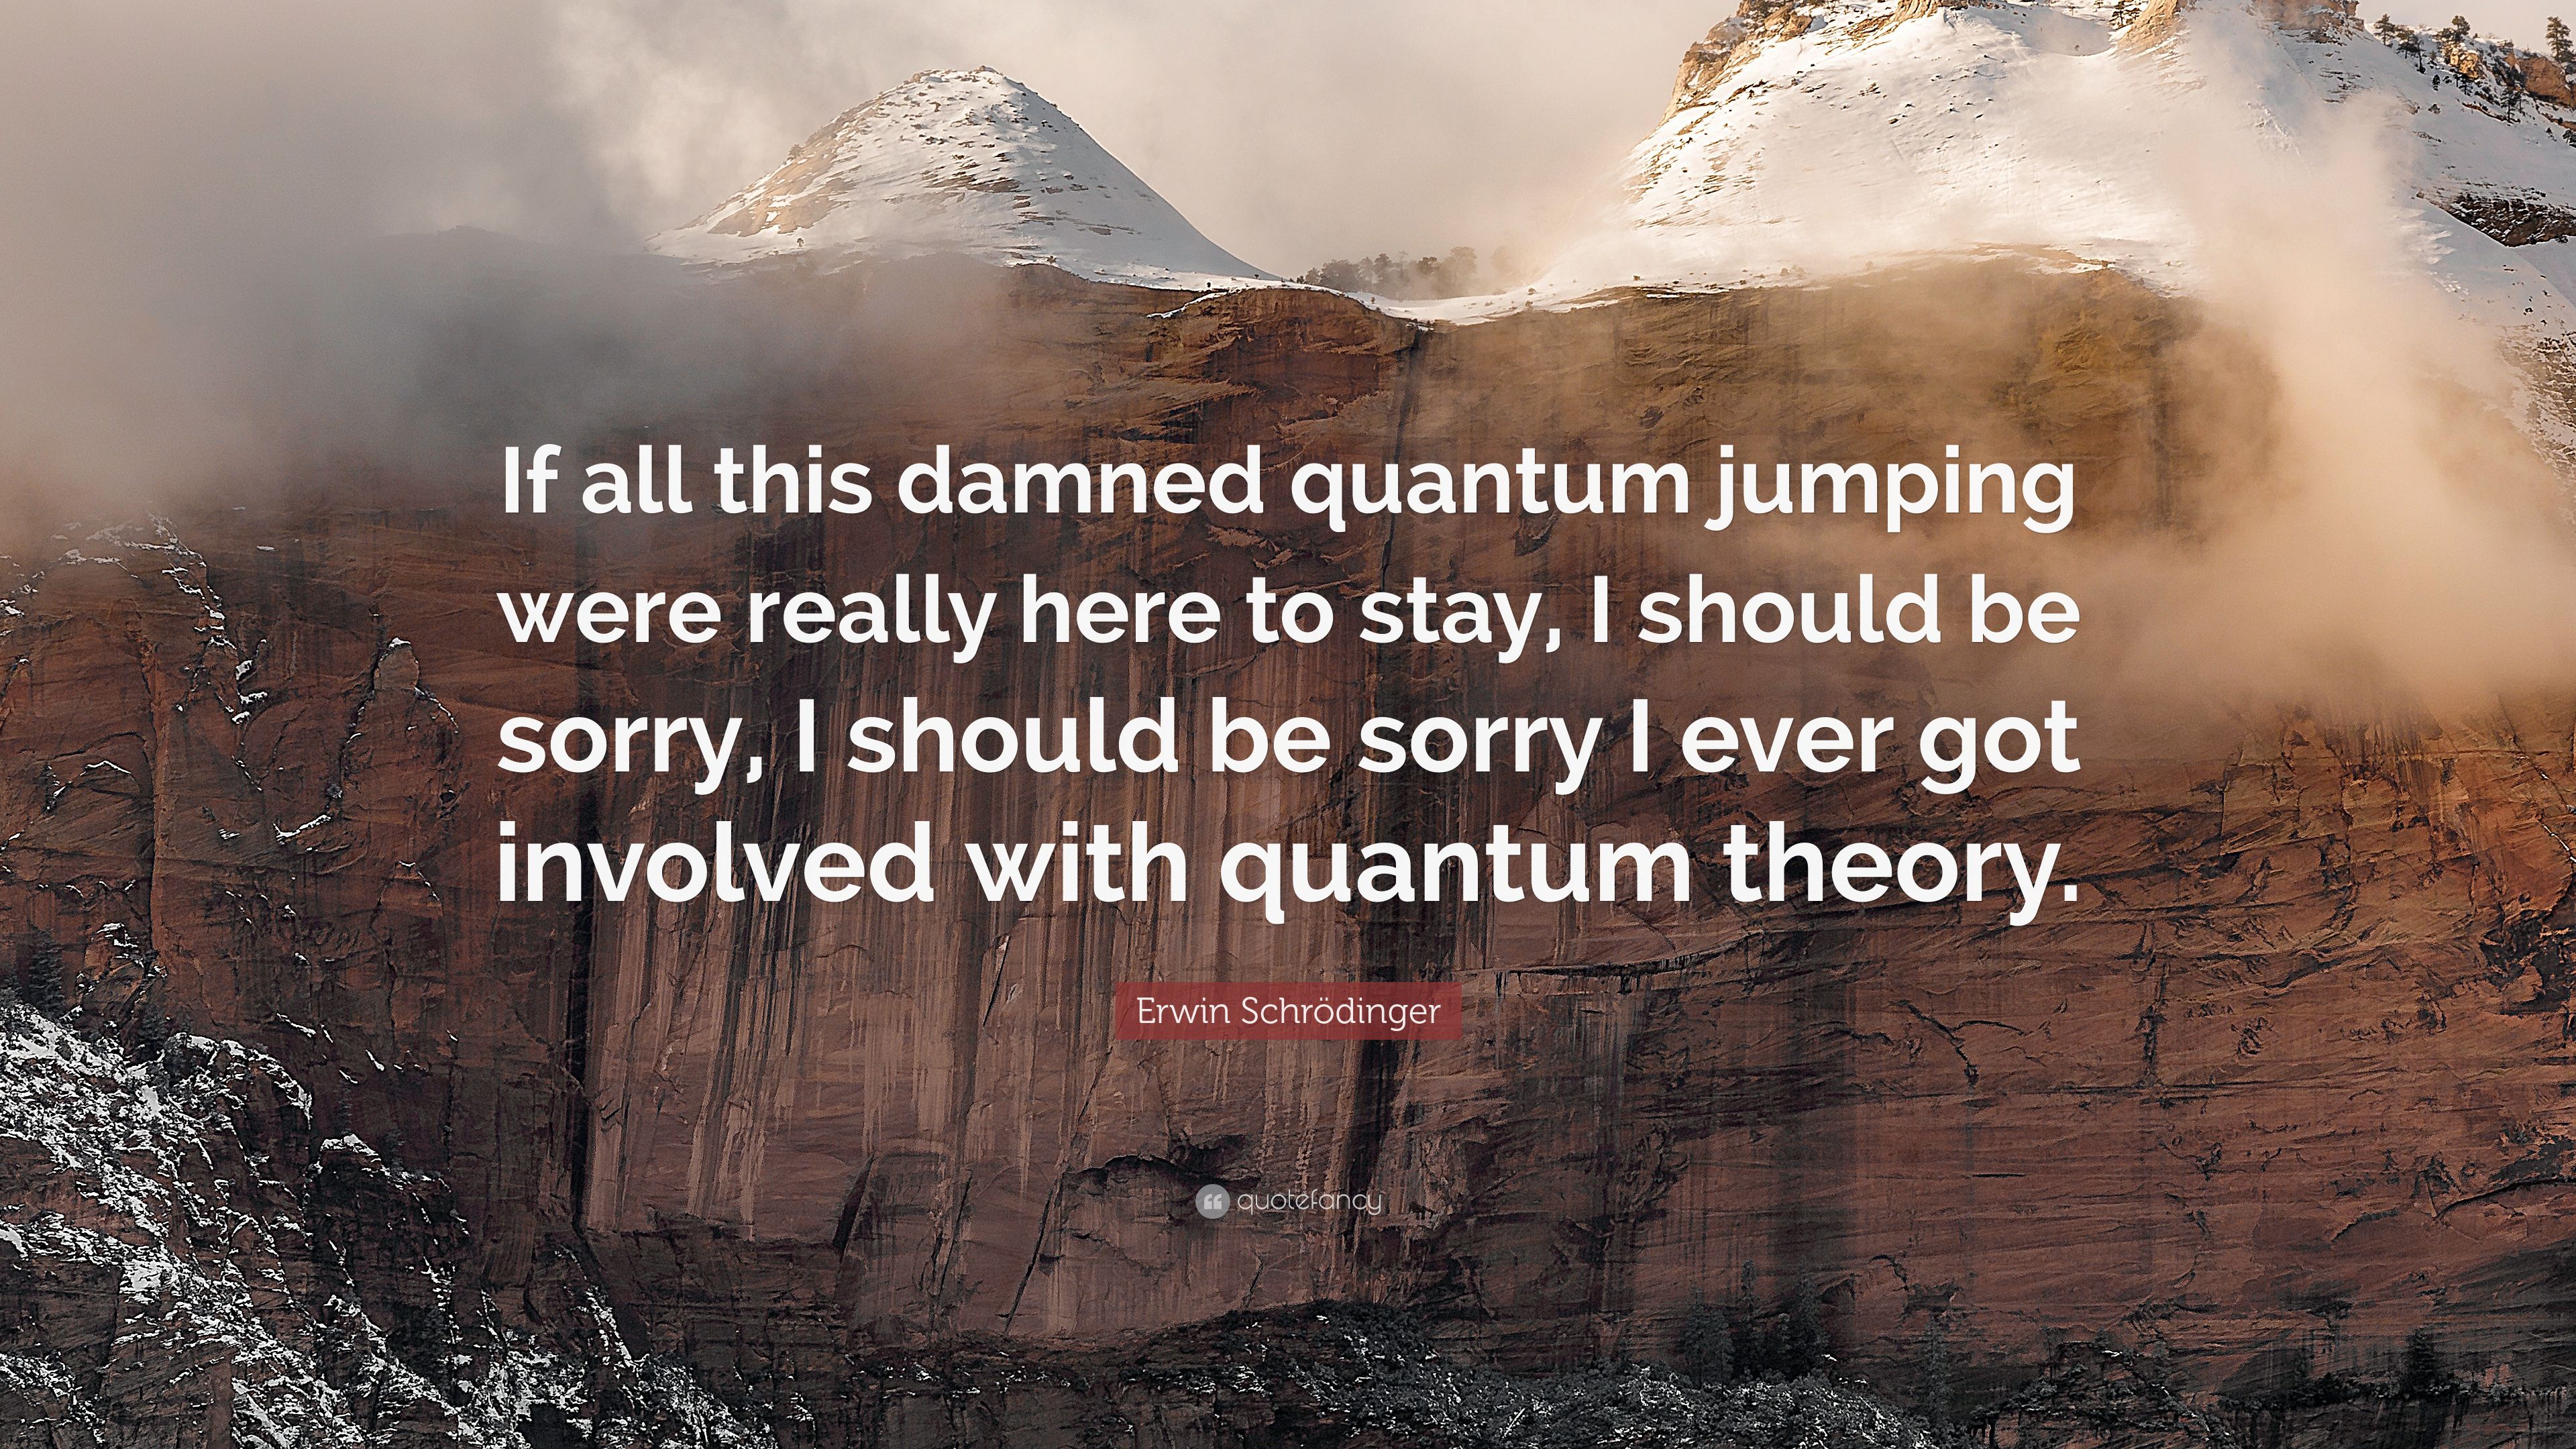 If all this damned quantum jumping were .quotefancy.com